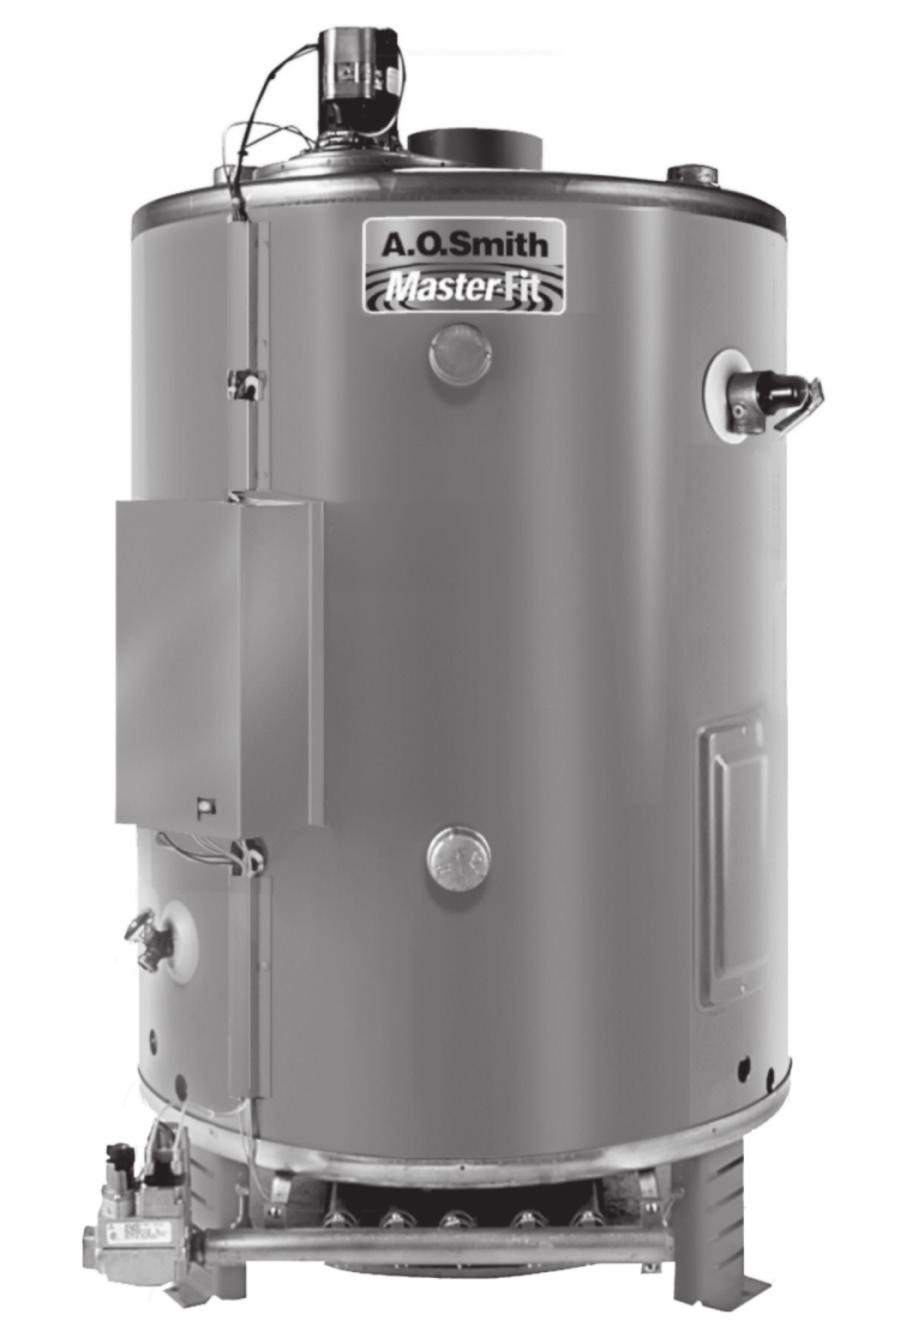 Instruction Manual commercial gas water heaters 500 Tennessee Waltz Parkway Ashland City, TN 37015 MODELS BTR(C) 151, BTR(C) 201 SERIES 100/101 INSTALLATION - OPERATION - SERVICE - MAINTENANCE -